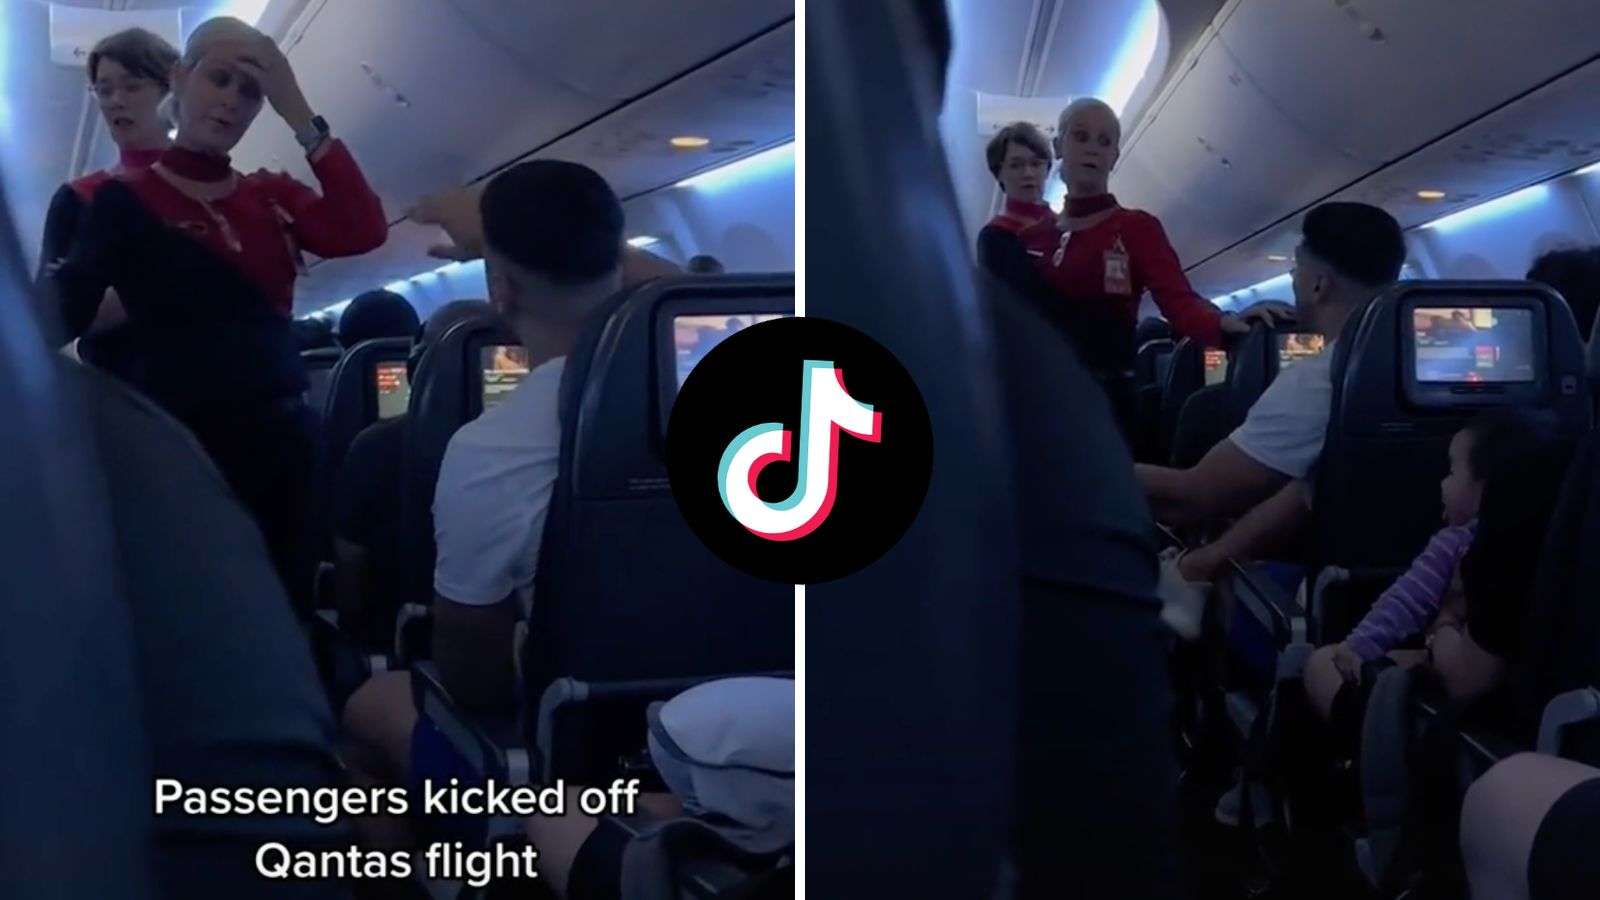 TikTok shows passenger clashing with flight attendant before being kicked off plane